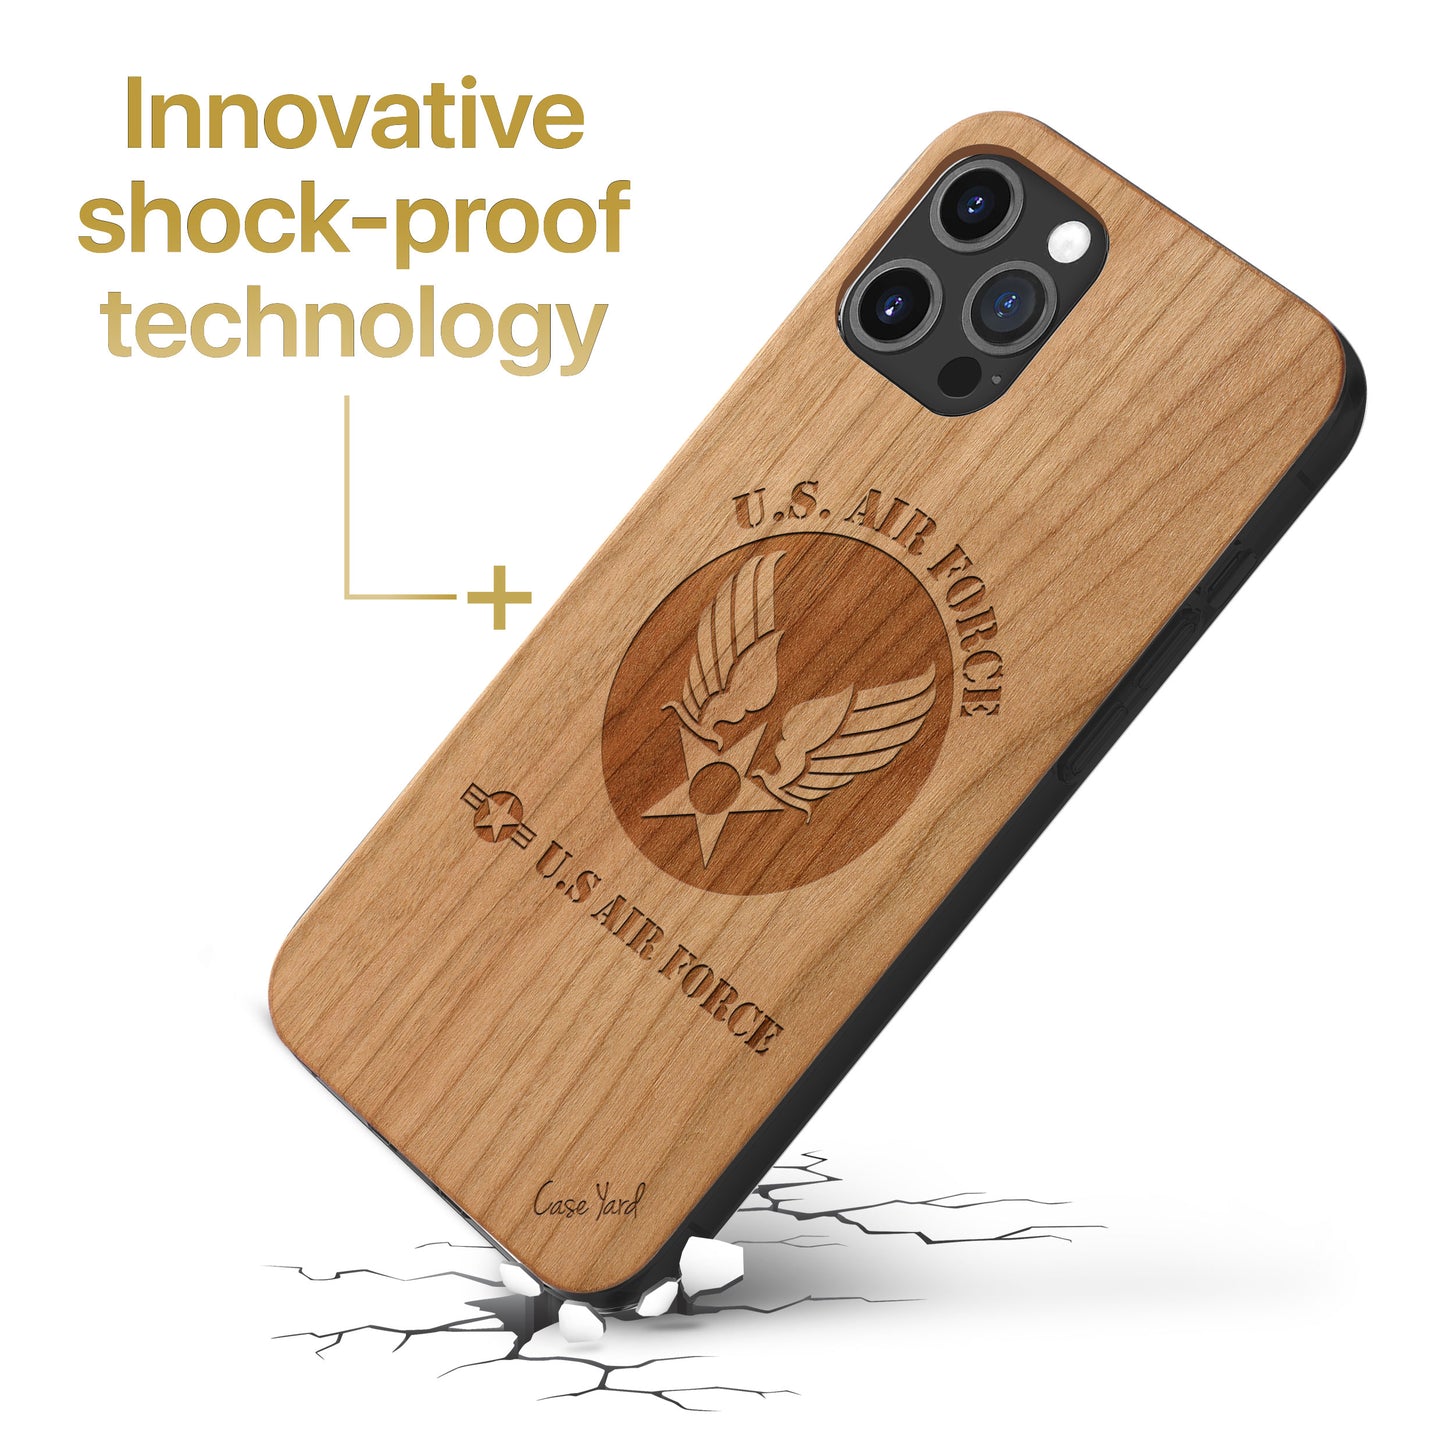 Wooden Cell Phone Case Cover, Laser Engraved case for iPhone & Samsung phone Air Force 2 Design